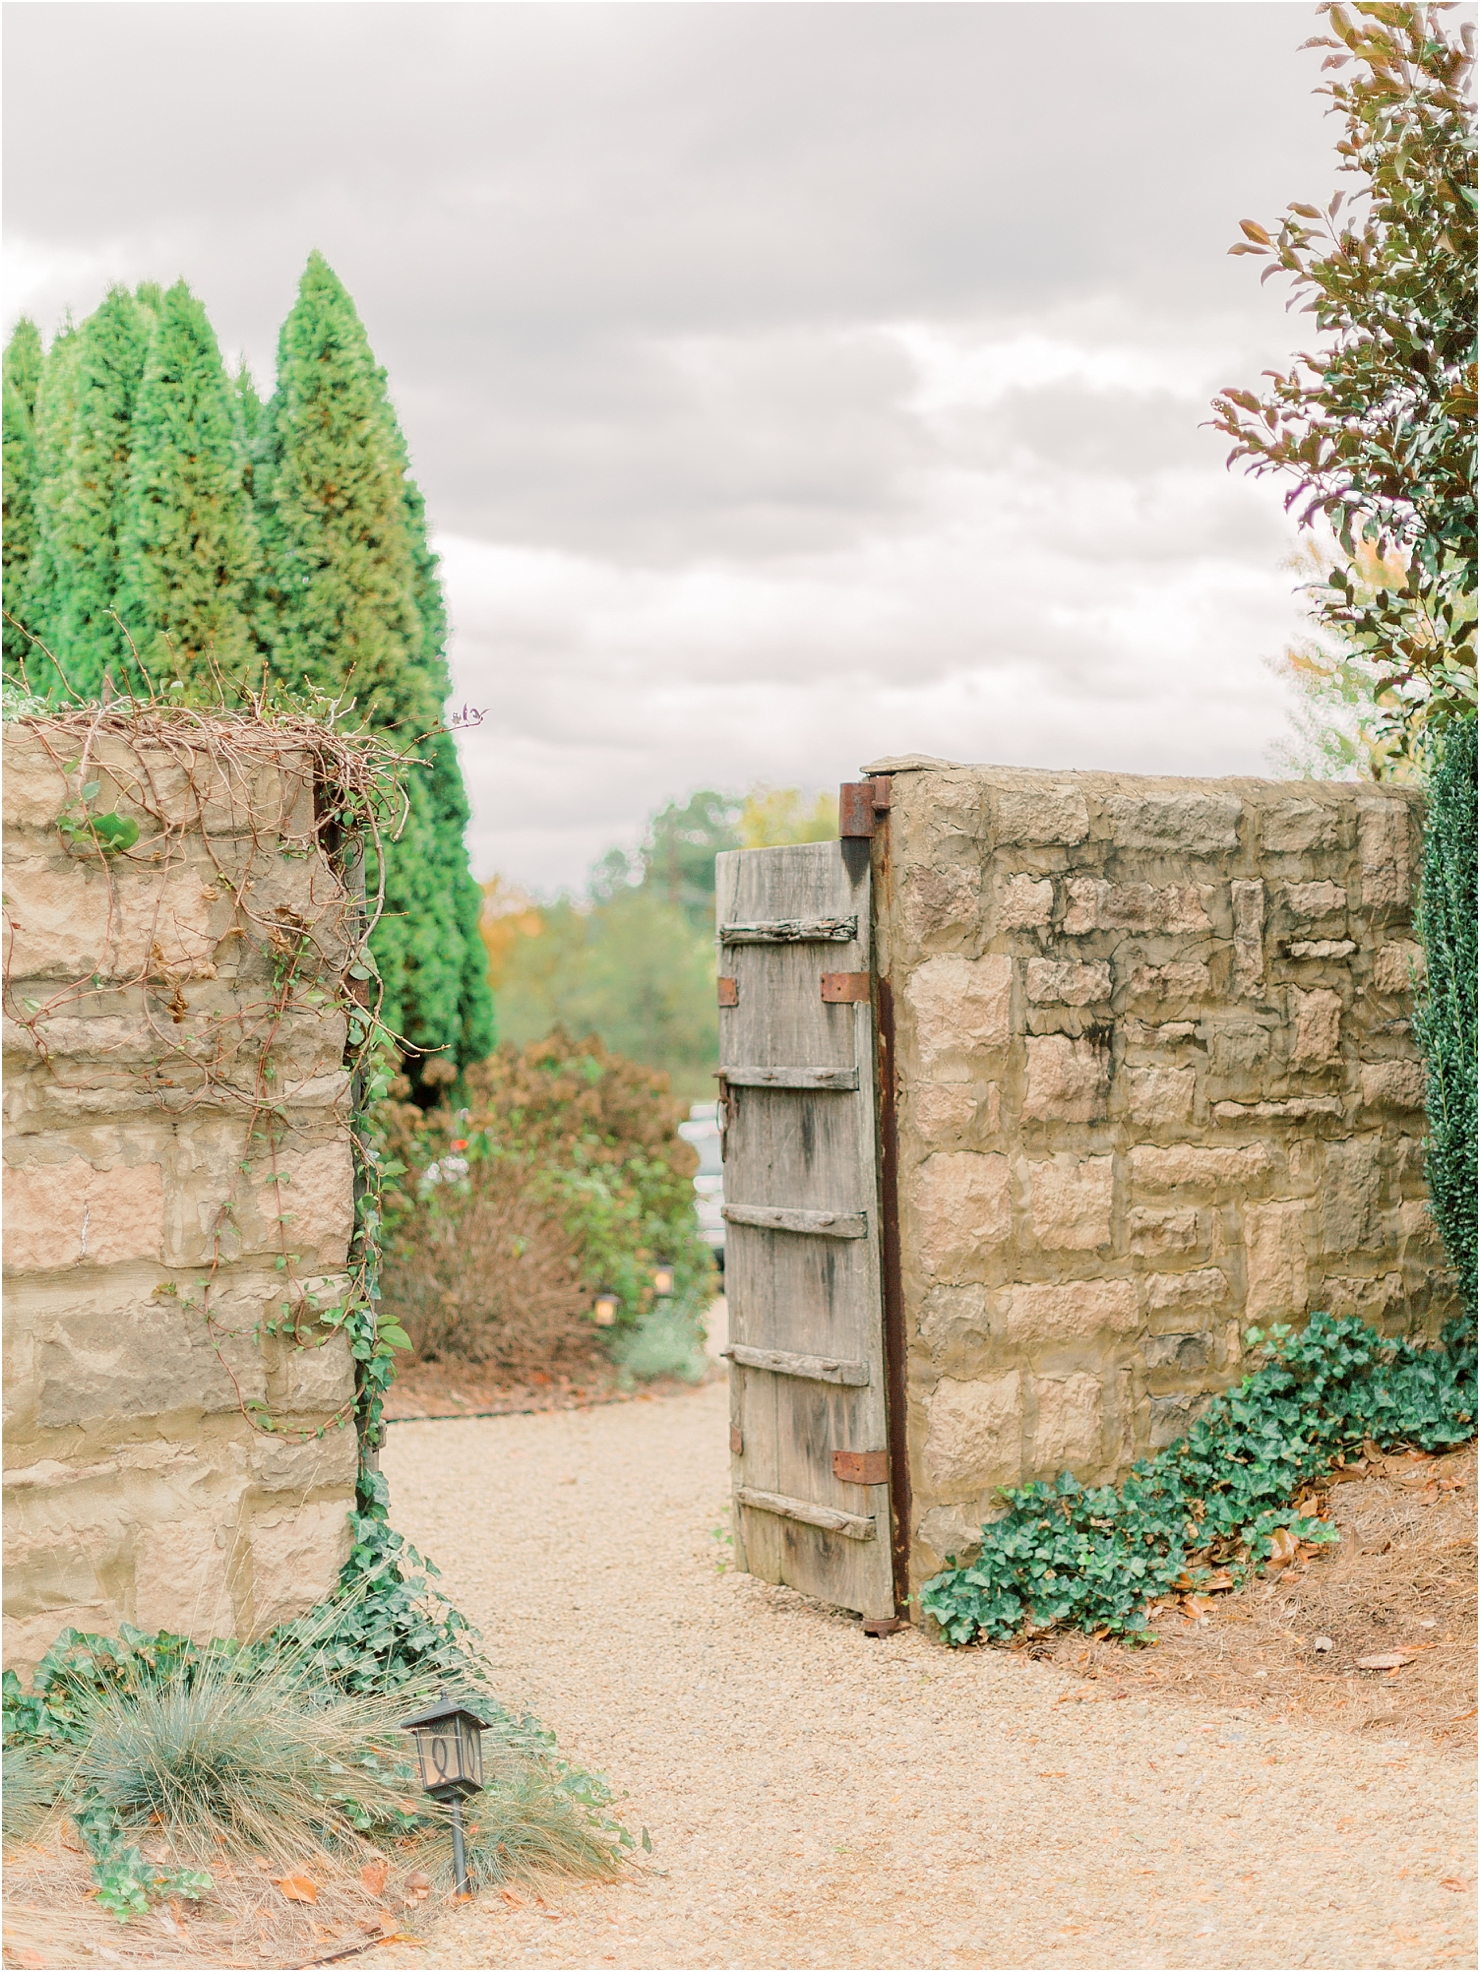 Courtyard Gate French Architecture Chateau Chateau Selah Madeline Trent Romantic Wedding Photographer